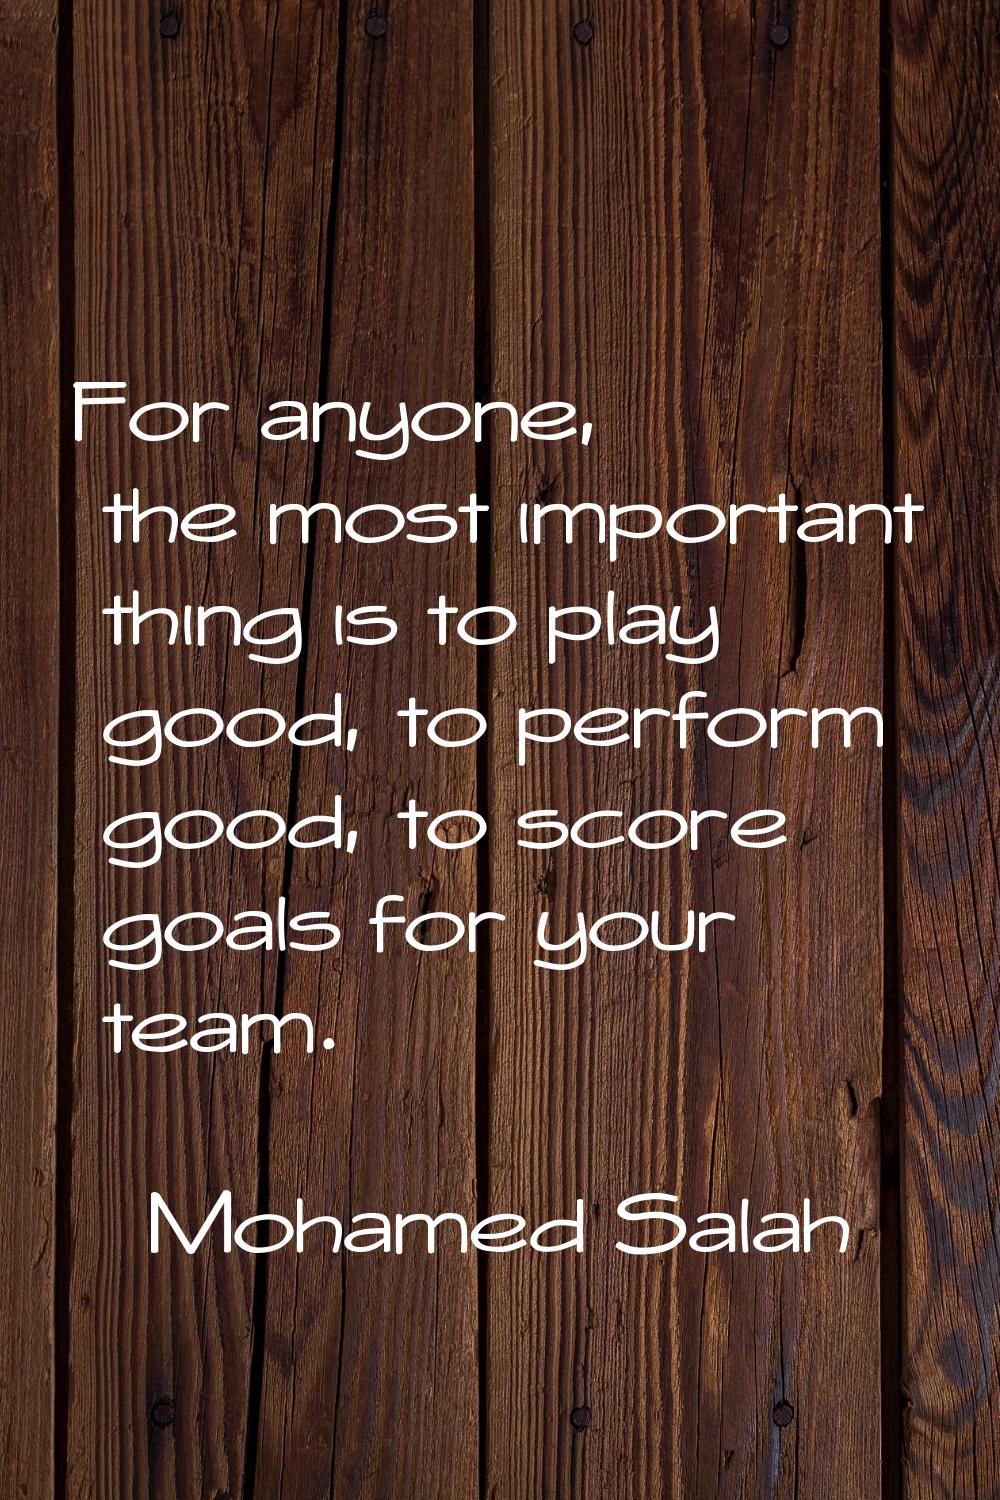 For anyone, the most important thing is to play good, to perform good, to score goals for your team